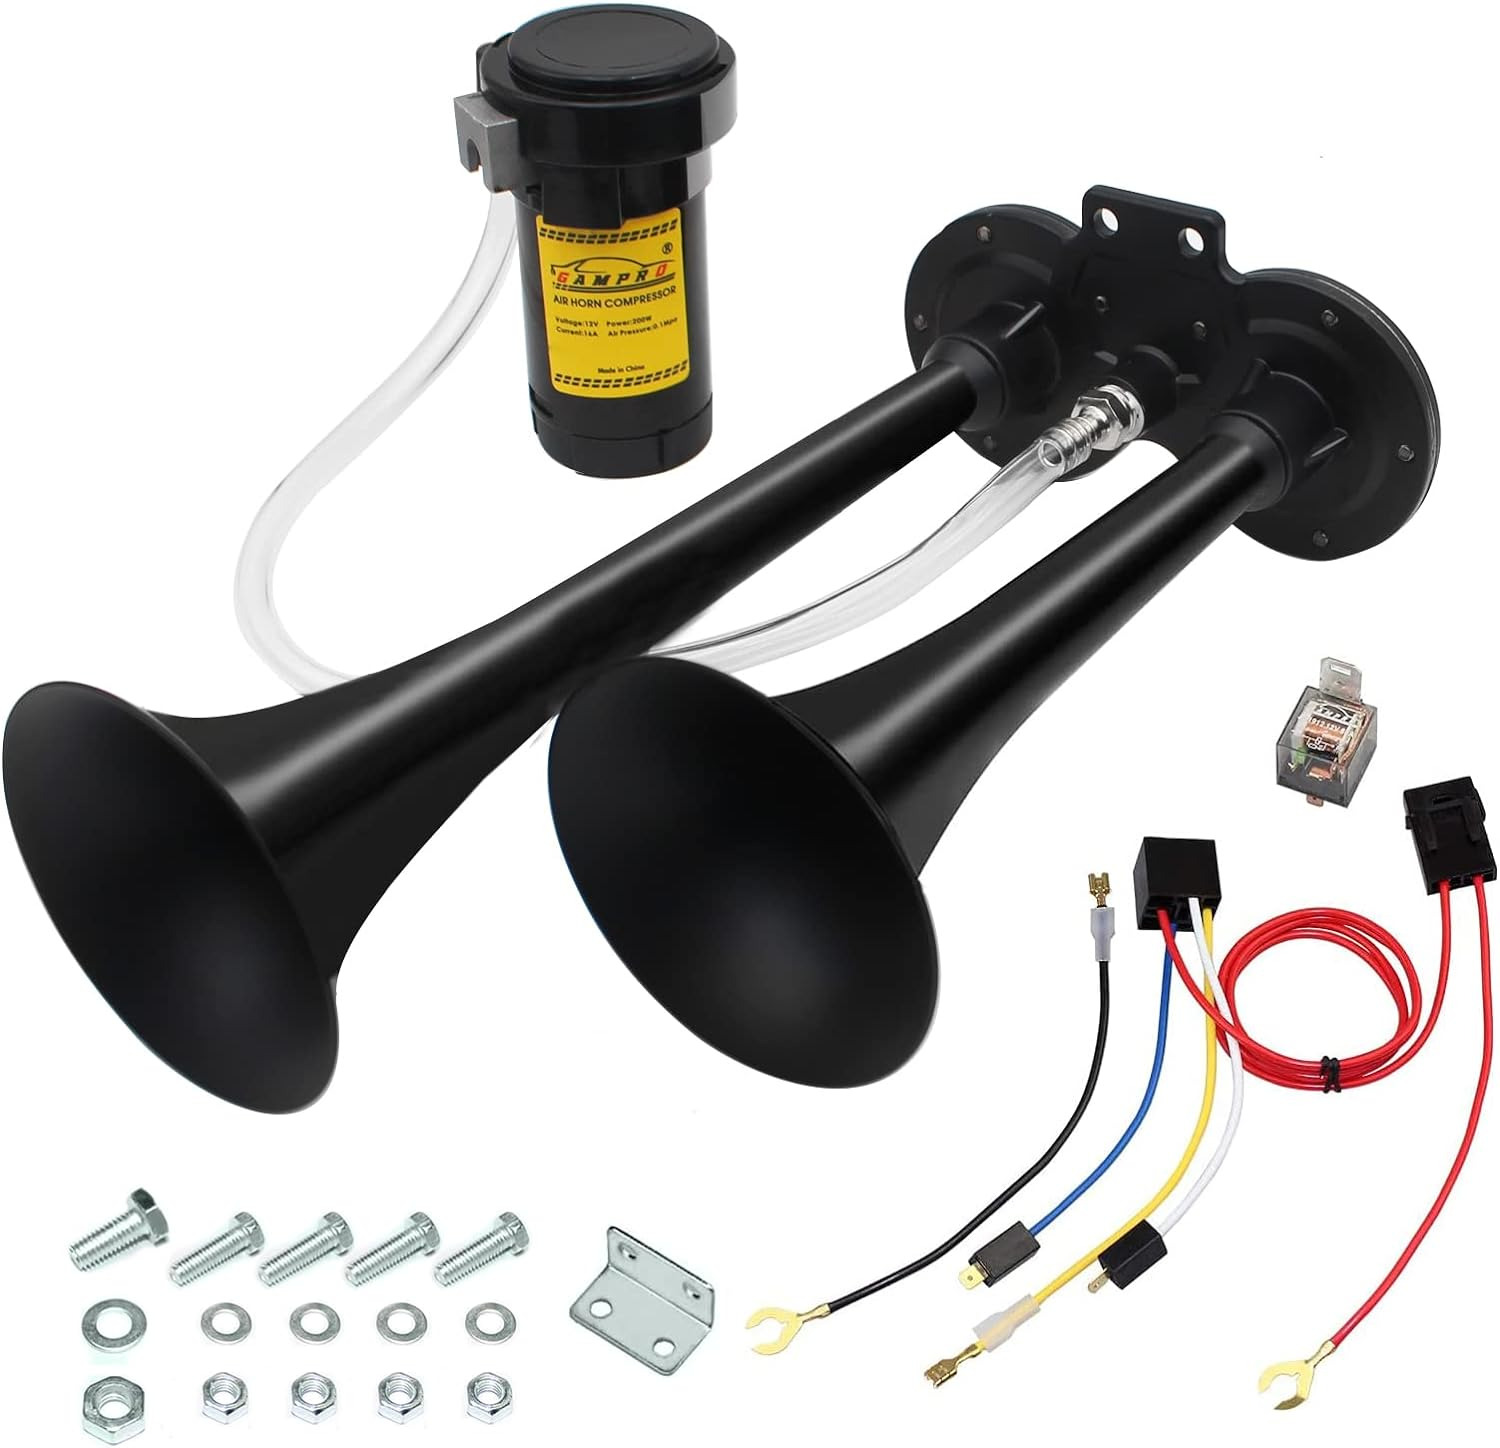 150Db 12V Air Horn, Chrome Zinc Dual Trumpet with Compressor for Any 12V Vehicle